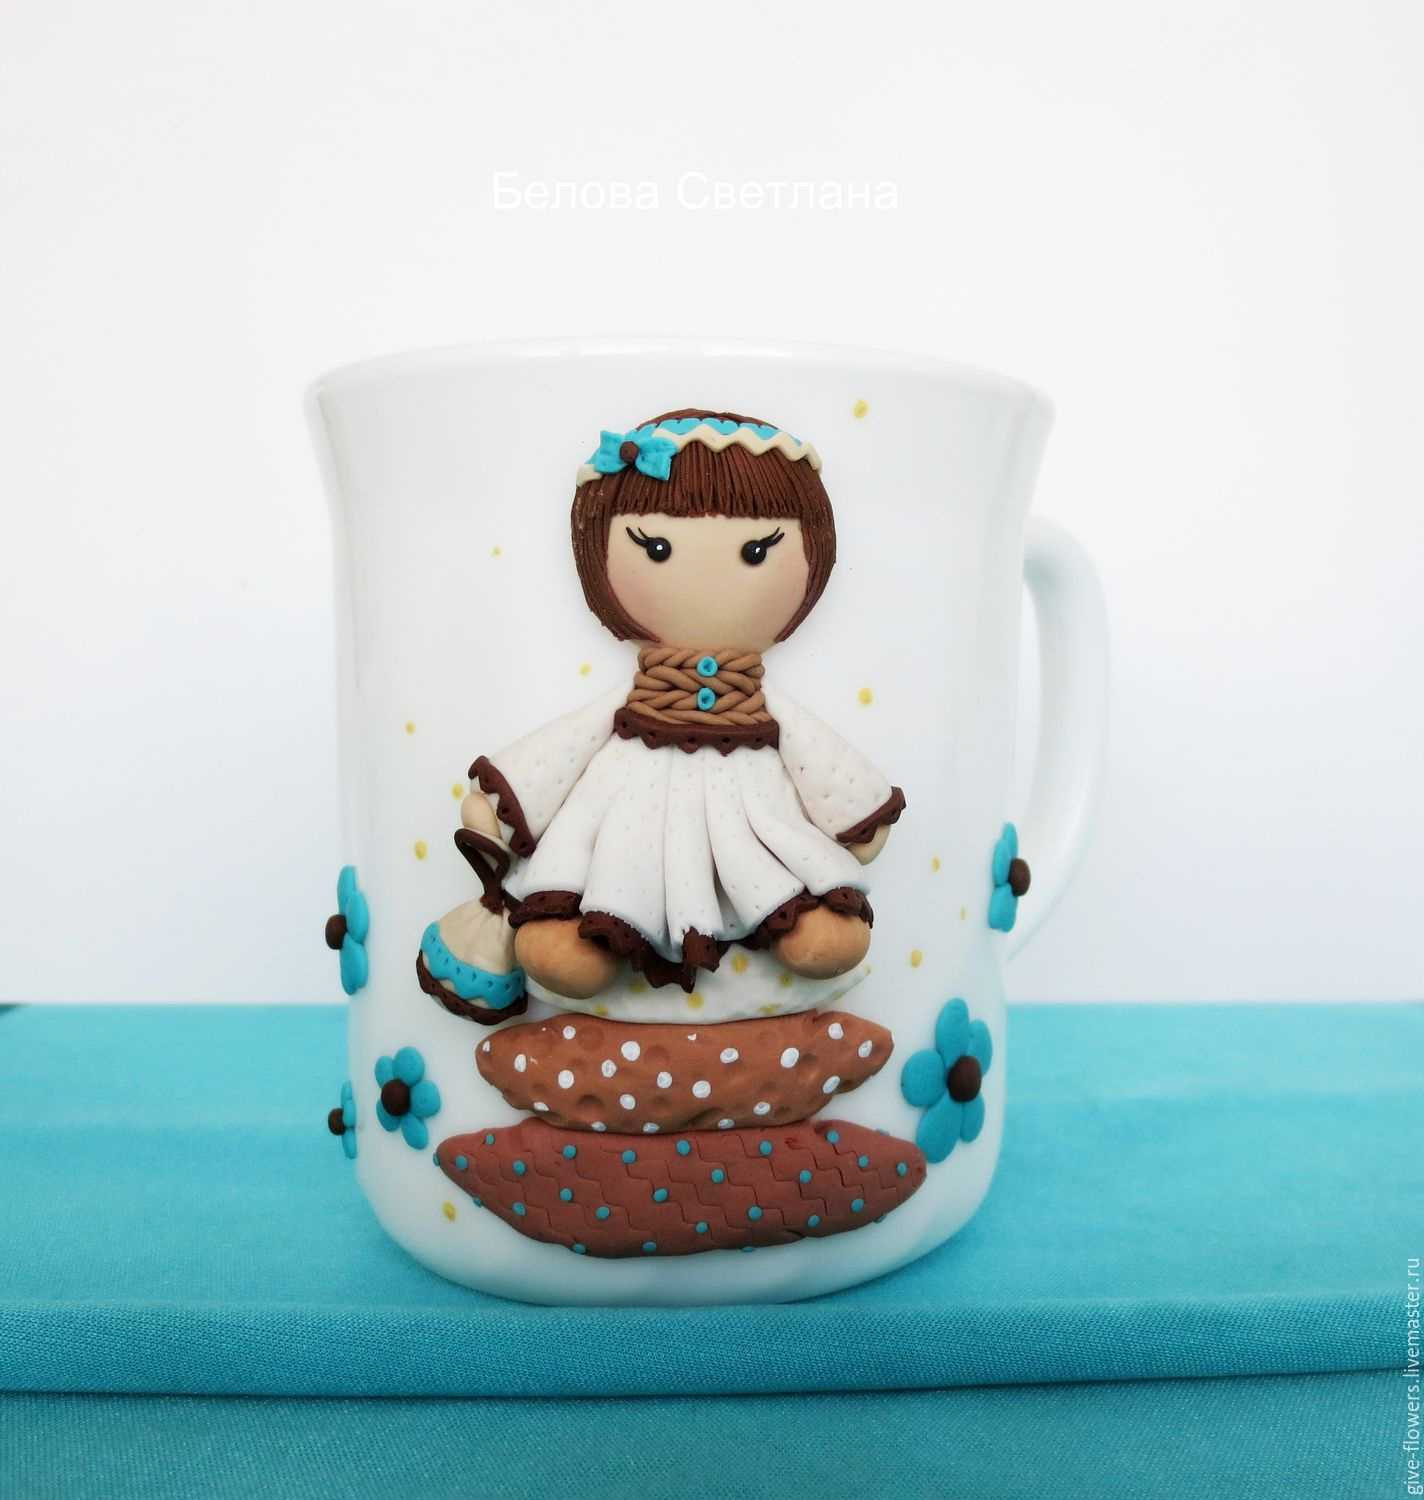 beautiful decoration of the mug with polymer clay animals at home